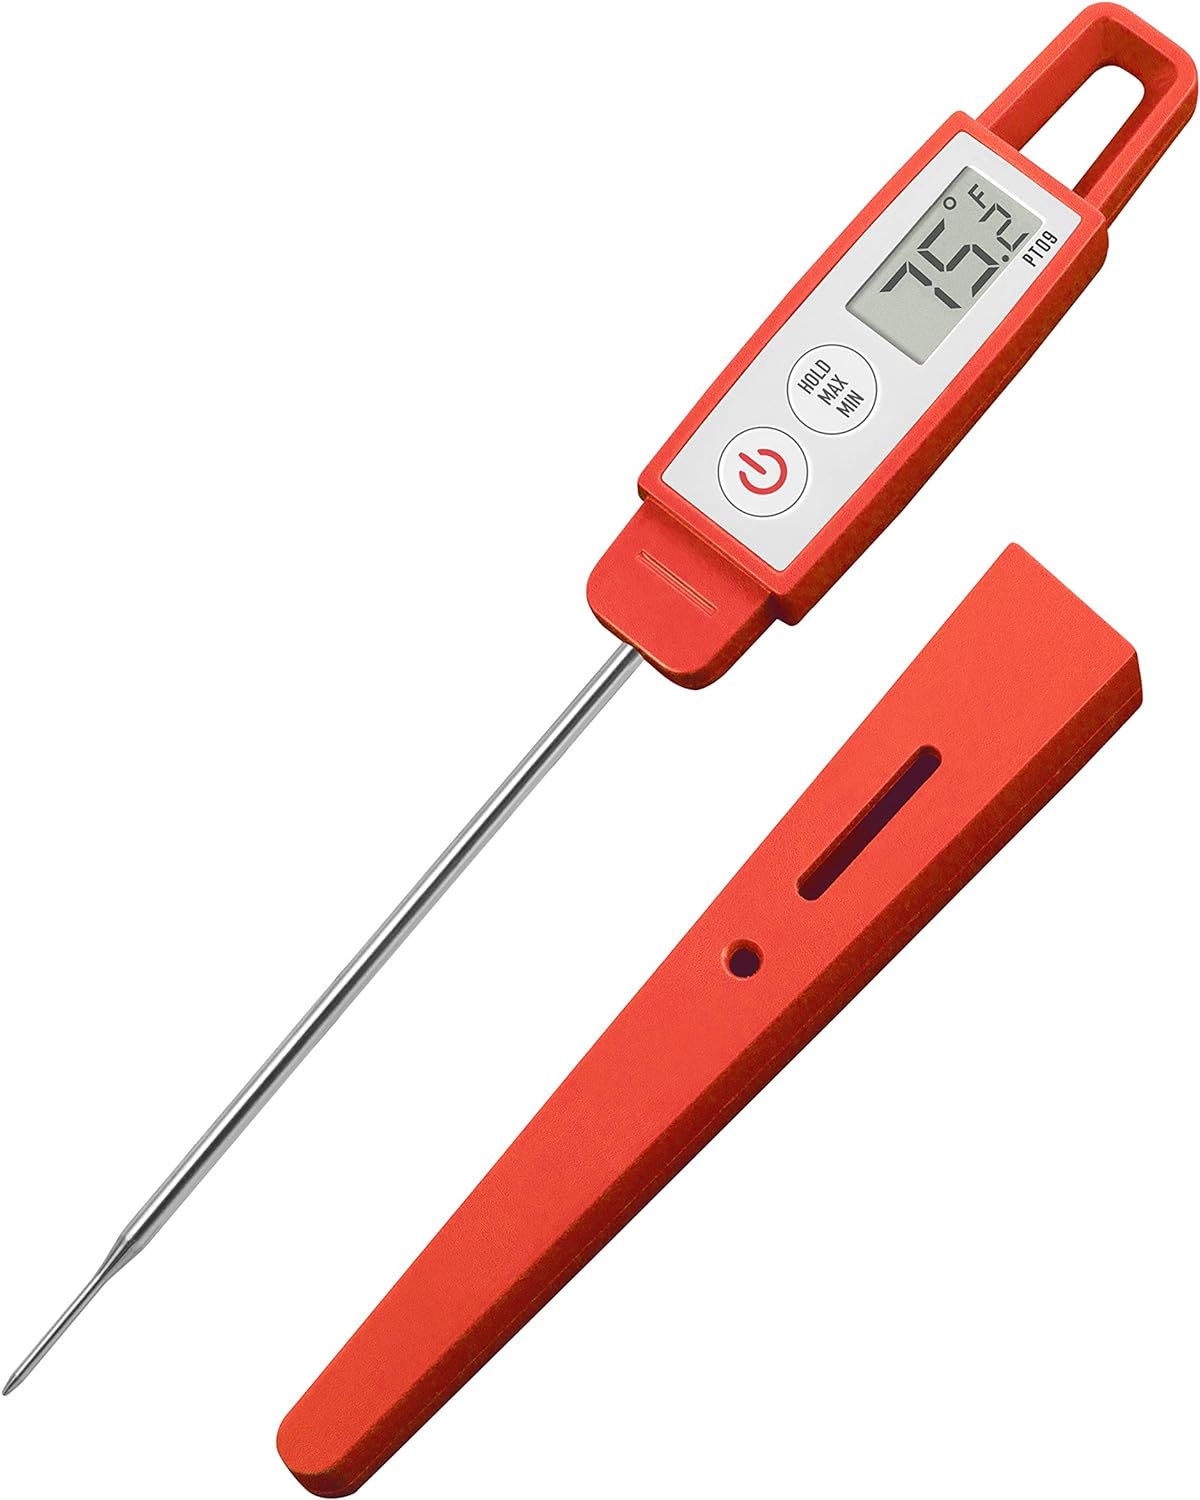 Lavatools PT09 Super-Quick Commercial Grade Digital Thermometer for Cooking, Meat, Candy, Candle, Liquid, Oil, 4.5 Compact Probe, Splash Proof, °C/°F Toggle, Hold Function - Sesame